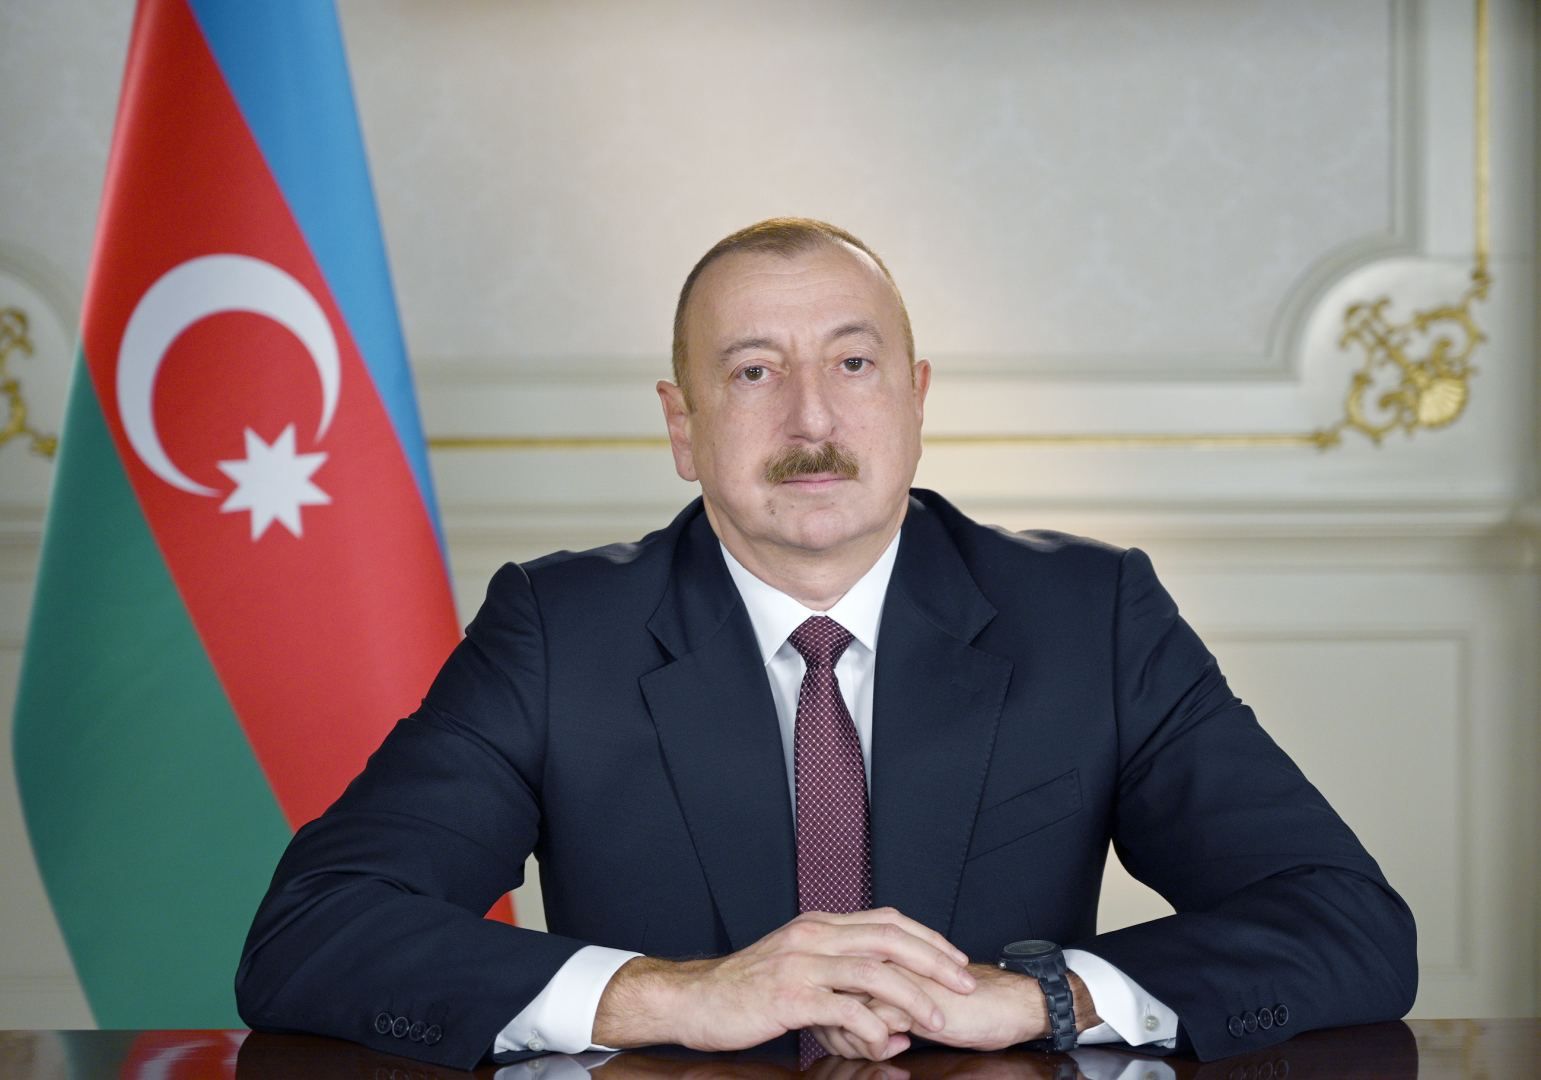 Group of Azerbaijani prosecutors granted highest special ranks following presidential order